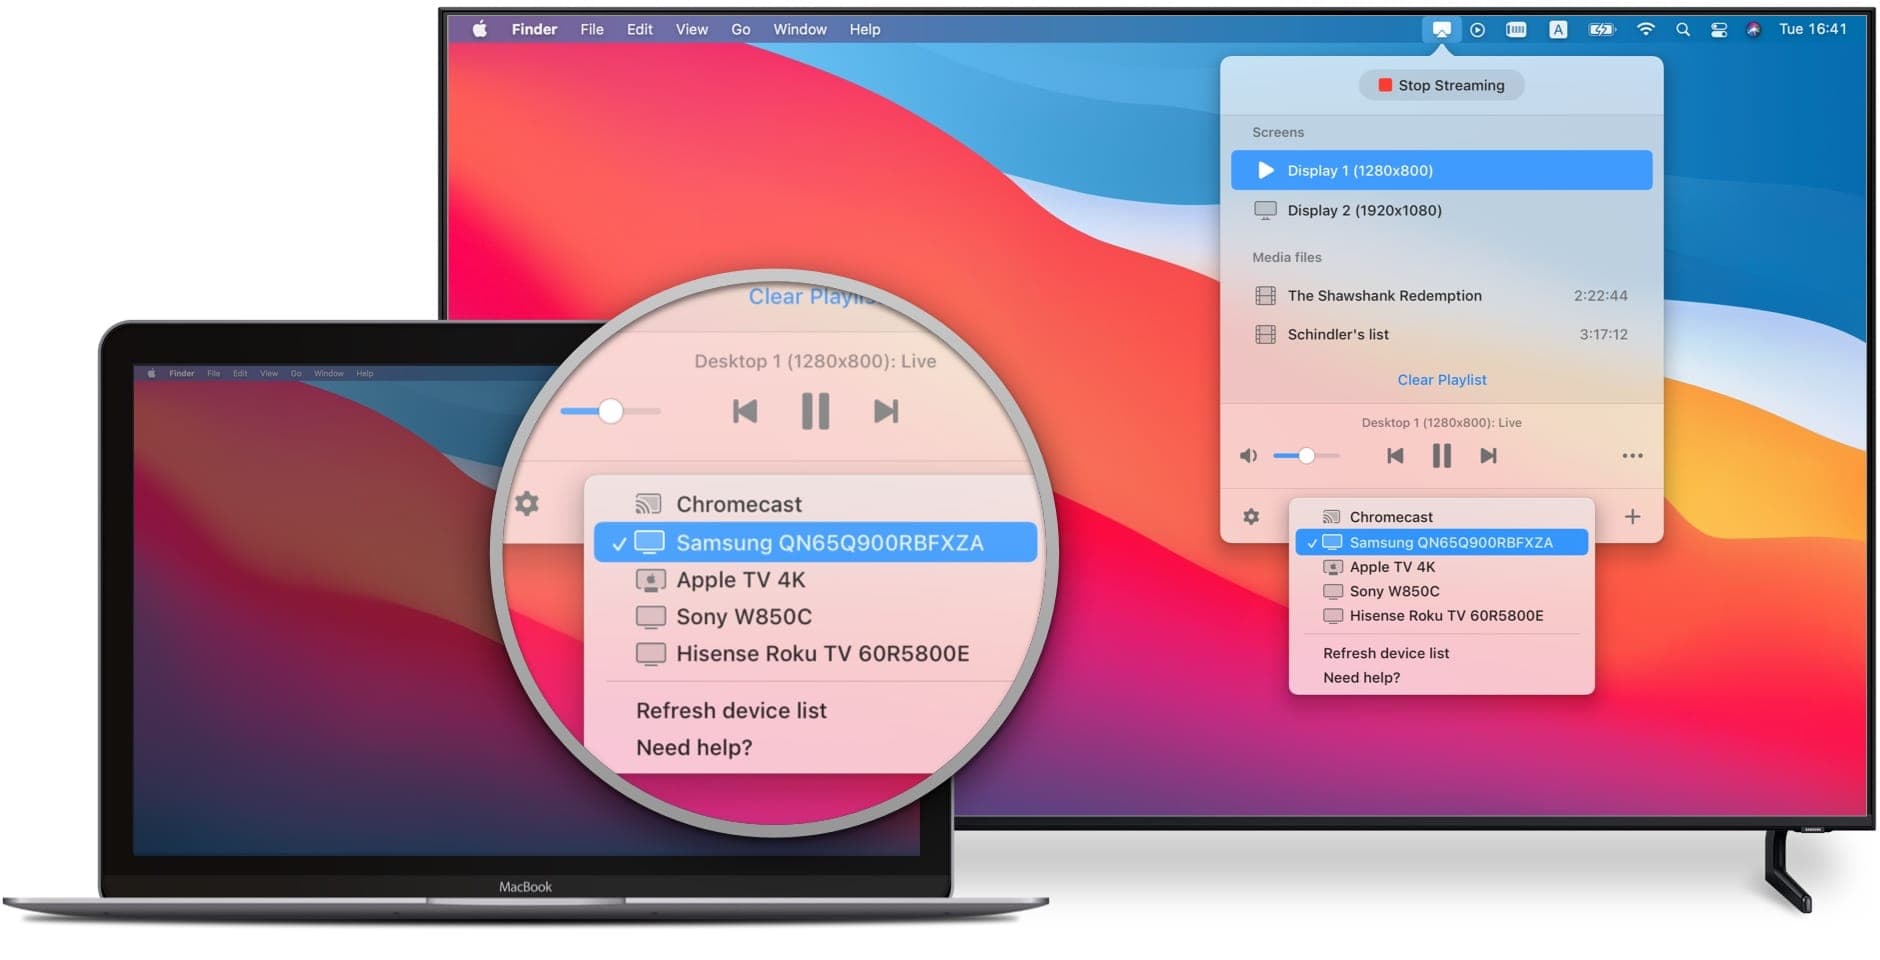 JustStream allows you to connect MacBook to TV.